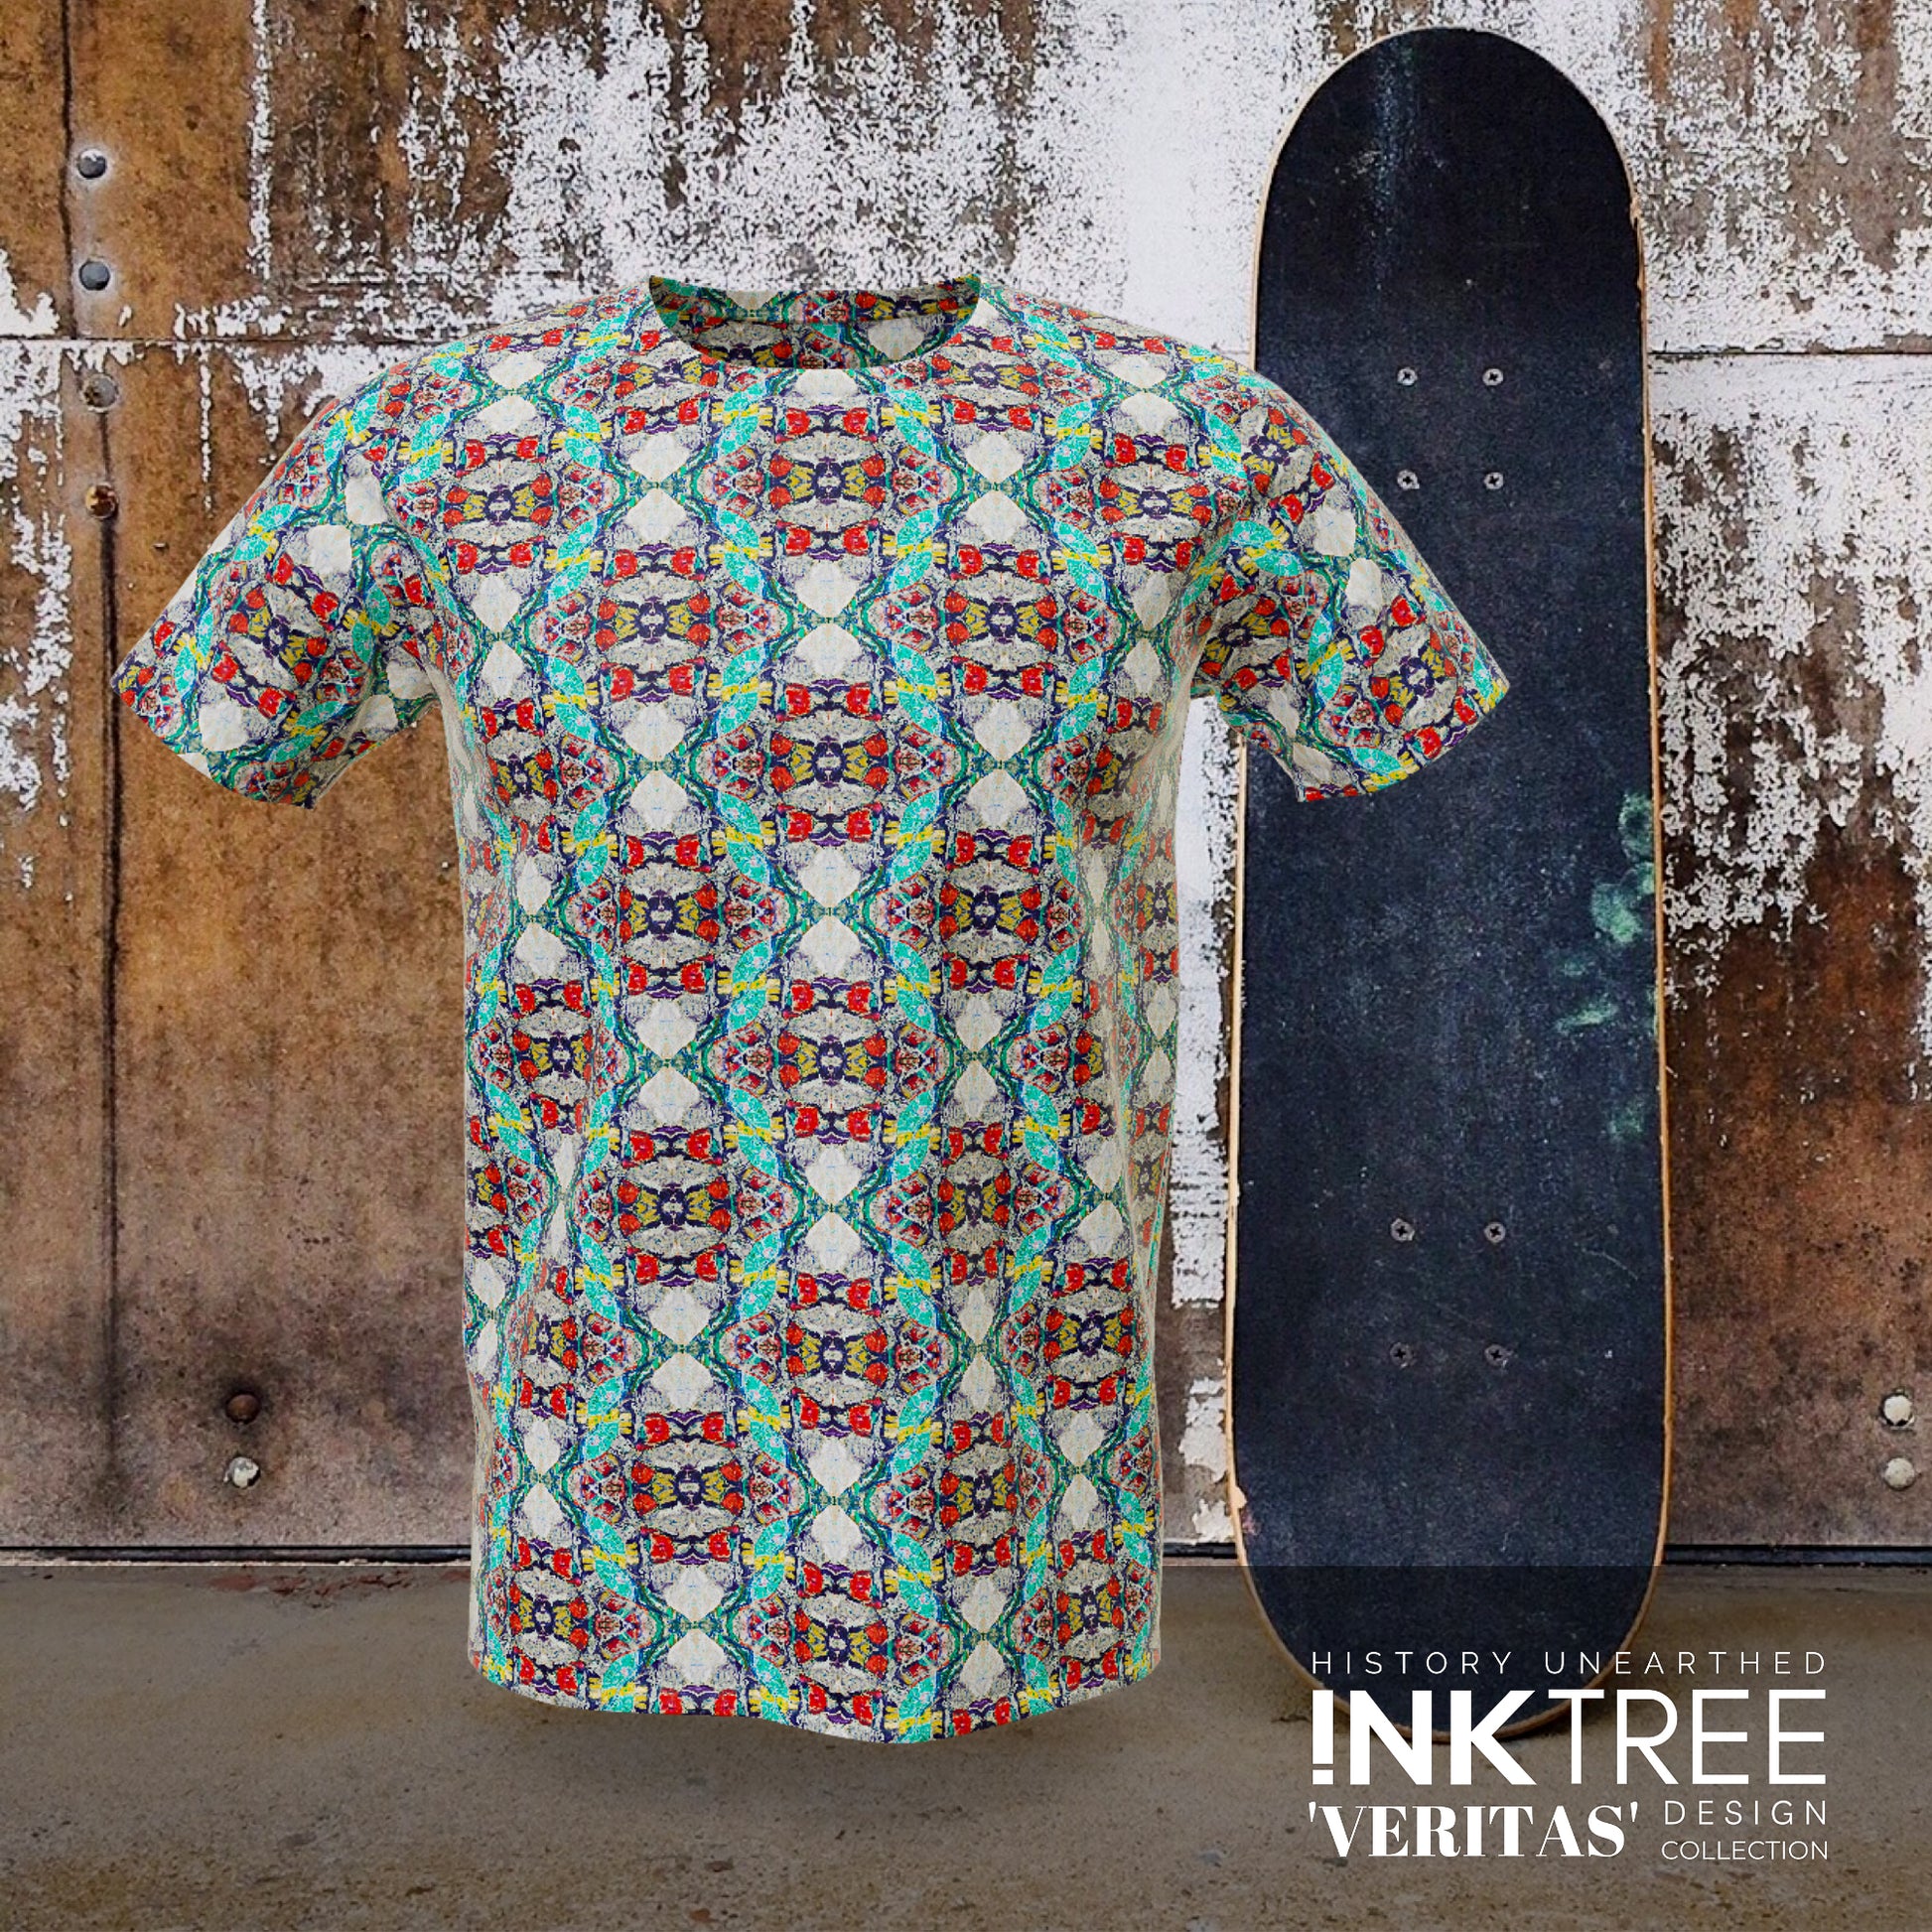  A blue, red and green t'shirt, with a skateboard and rusty wall background.